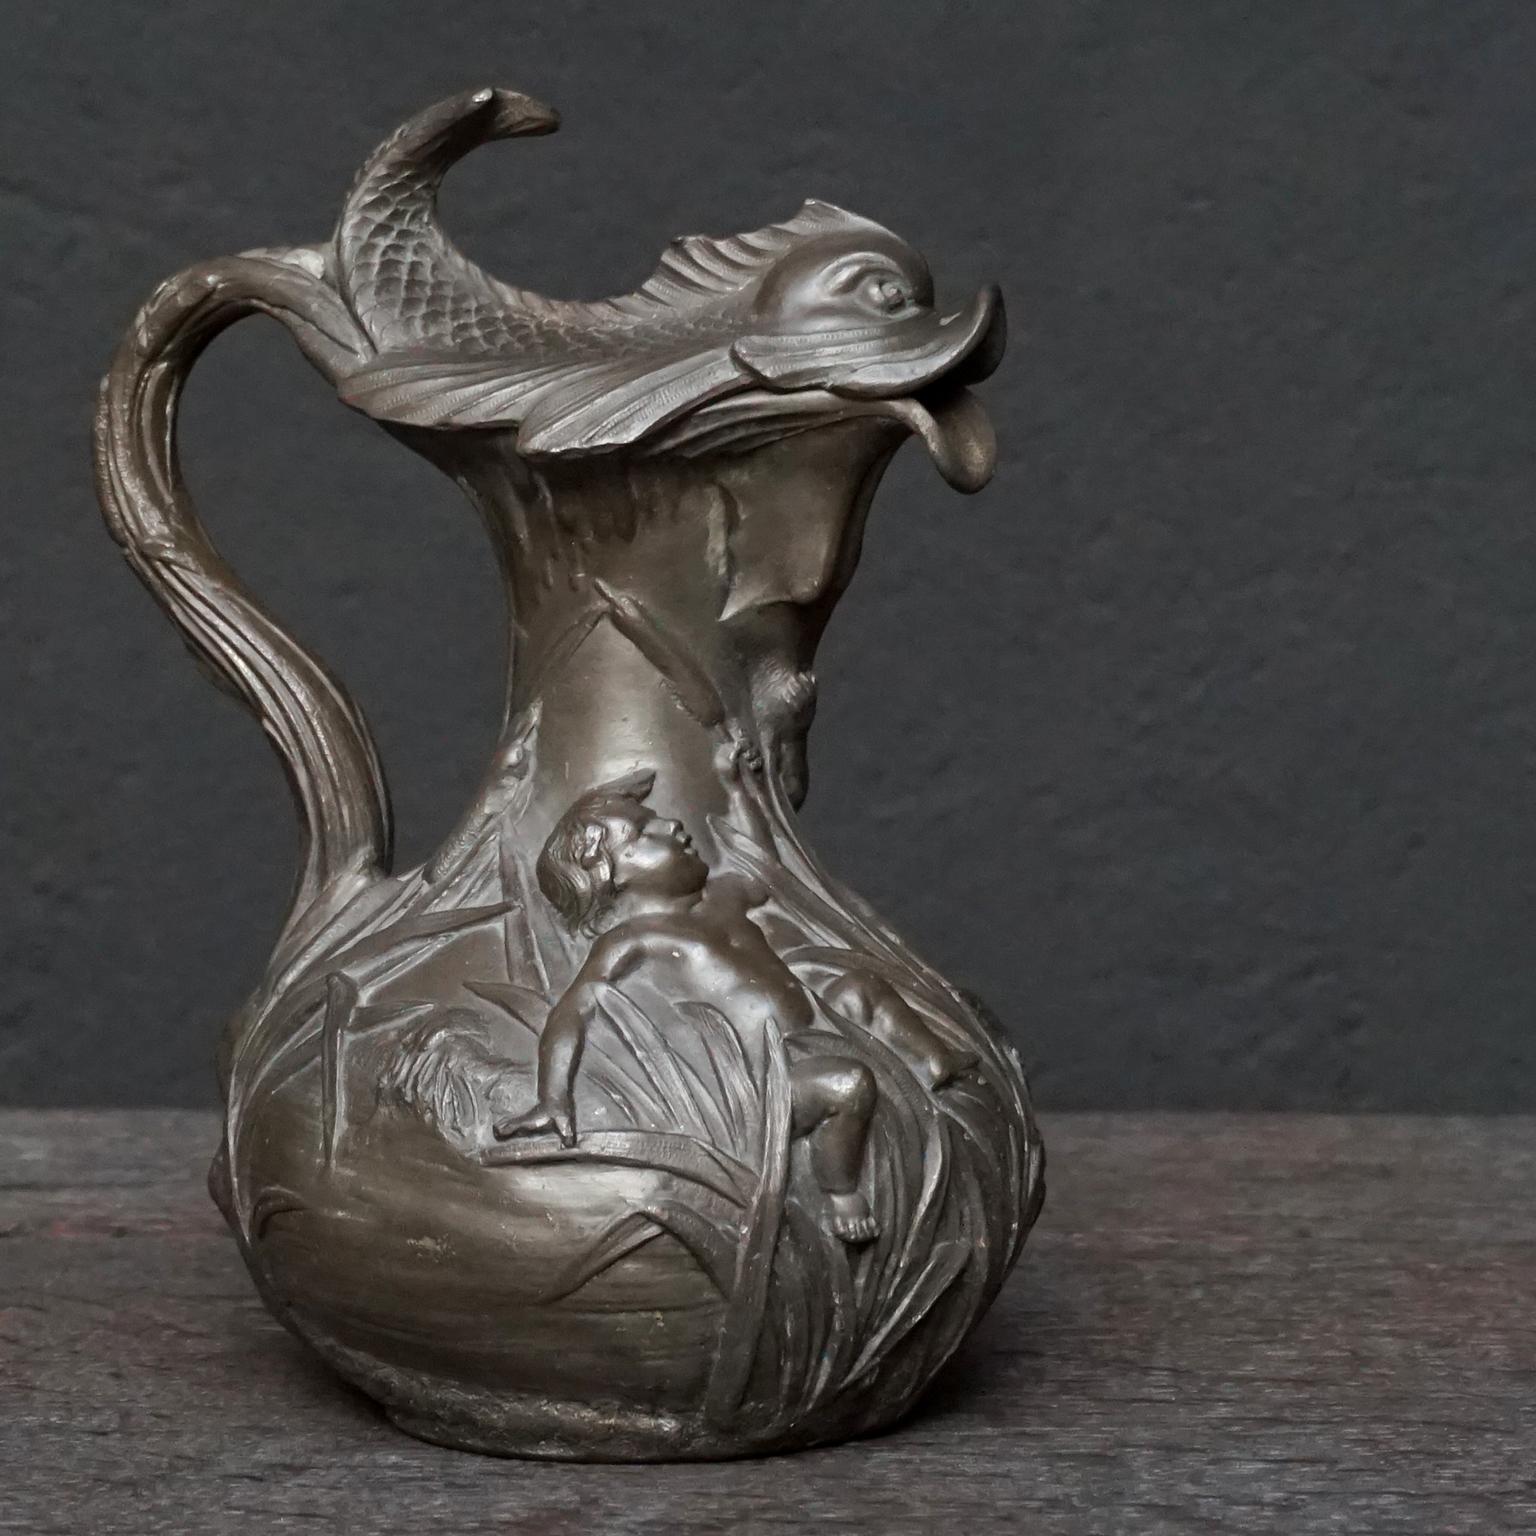 Beautiful heavy Art Nouveau pewter pitcher with charming scene of boys or putti playing in the riverside reed catching a fish, signed H. Huppe. This jug or pitcher dates somewhere between 1878-1904 when Huppe exhibited regularly at the Expo des